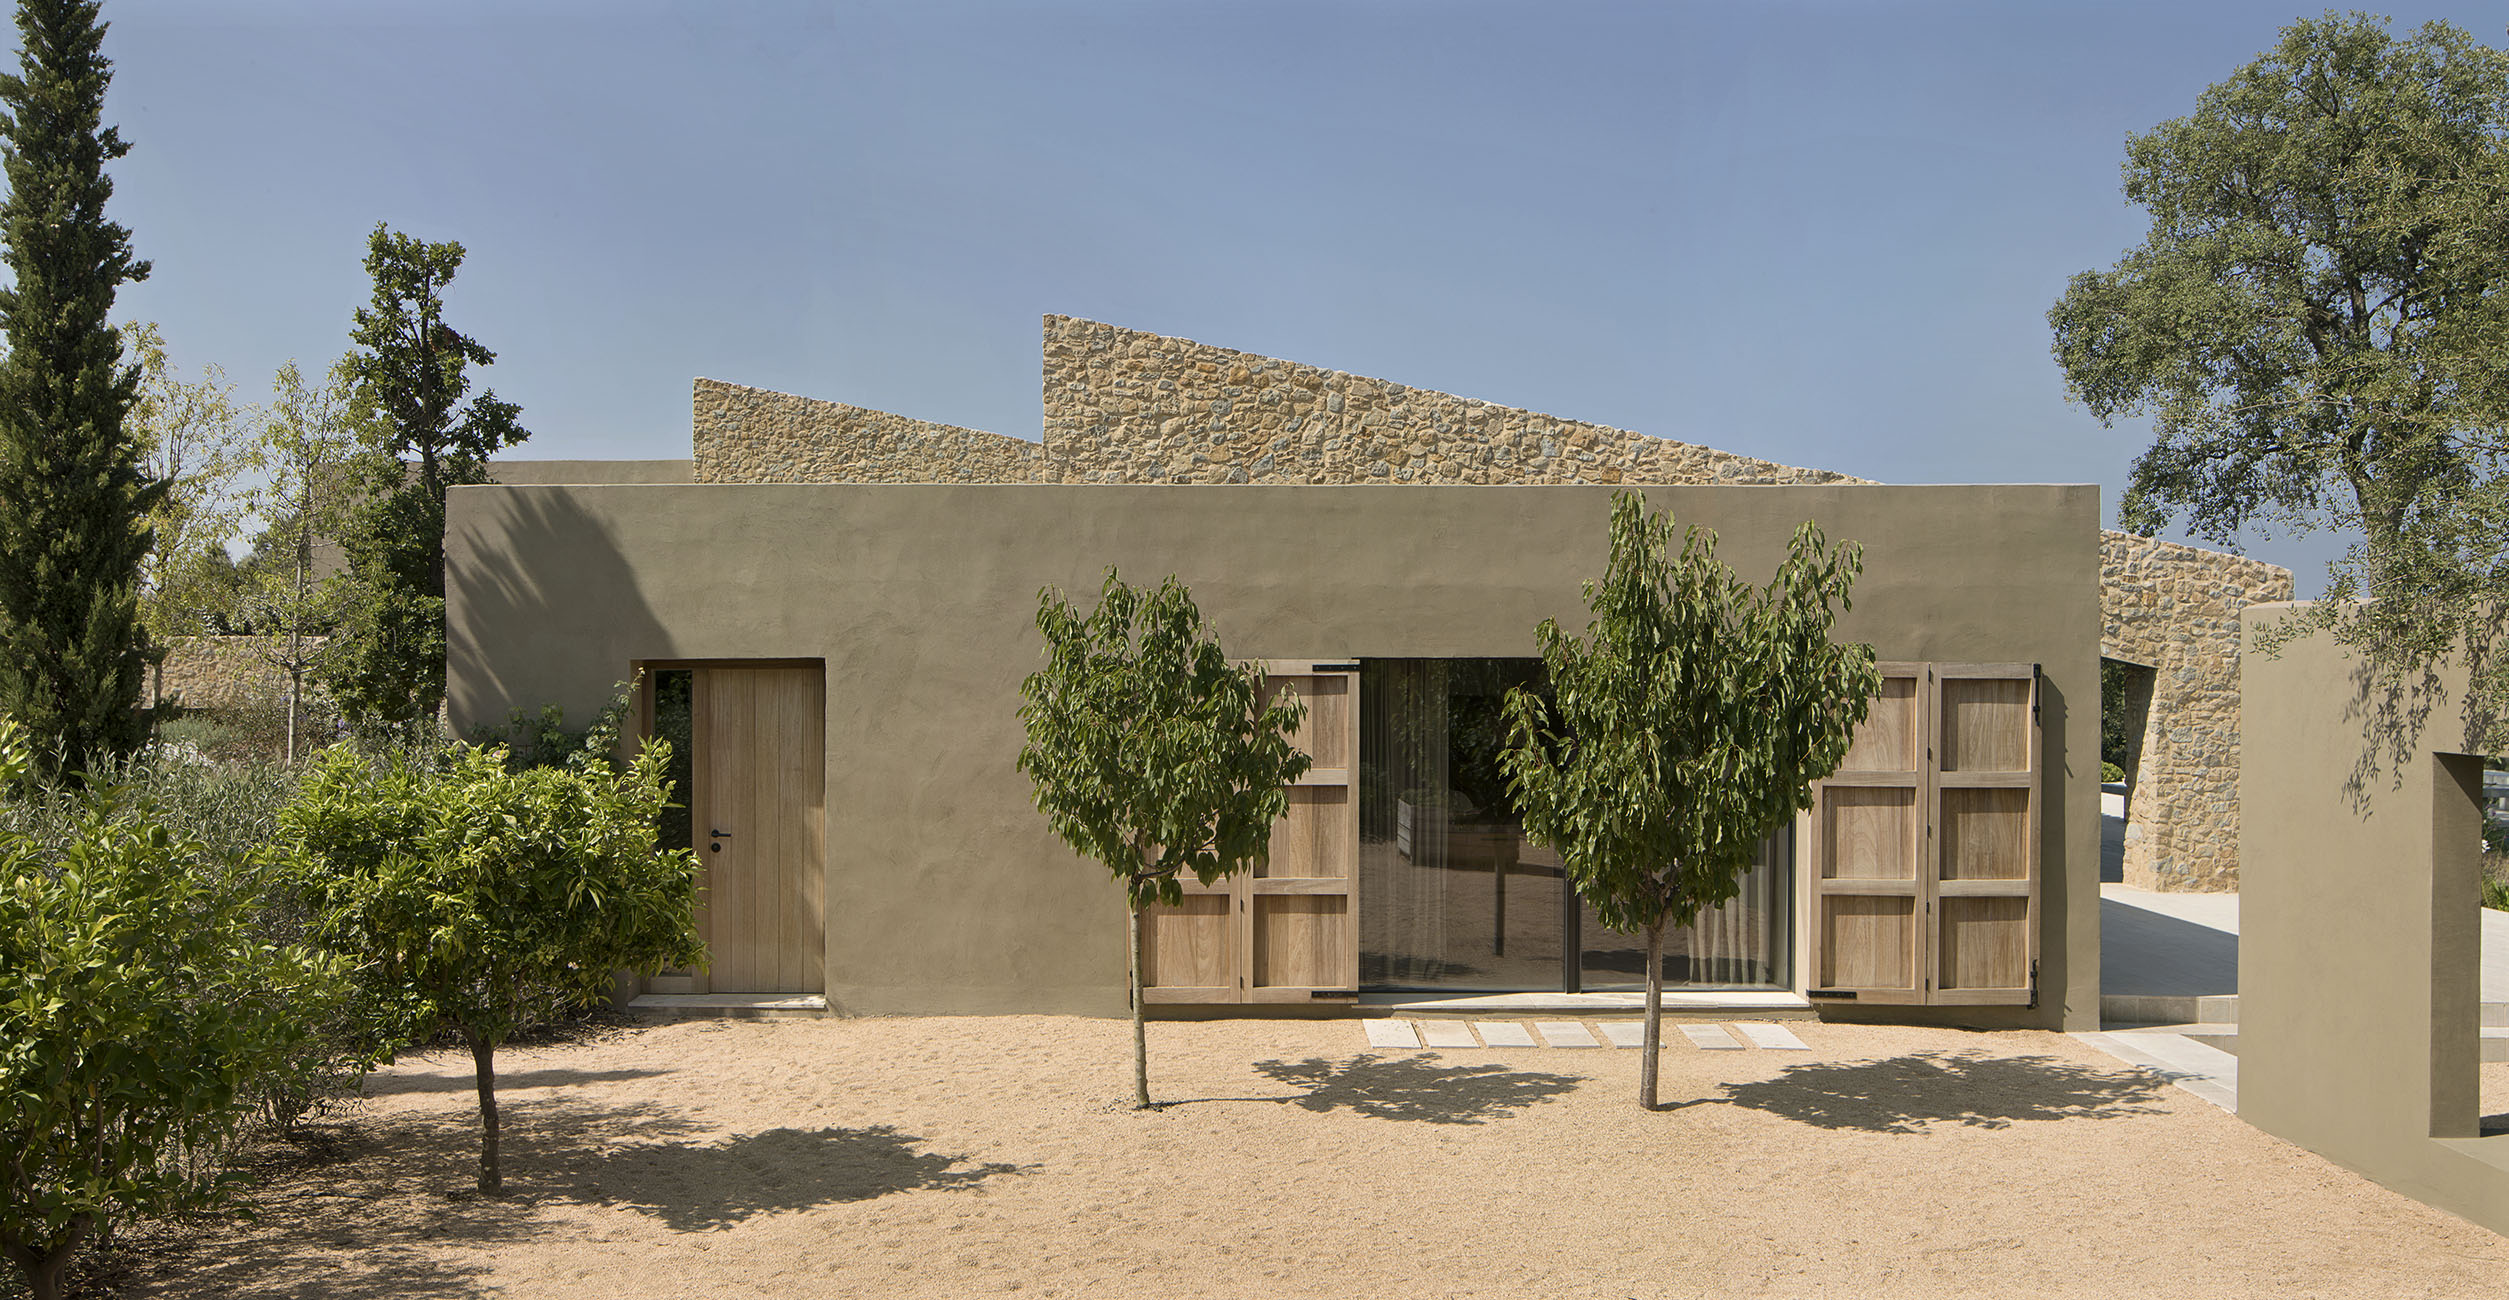 The exterior walls of the house feature a blend of natural stone material and lime stucco